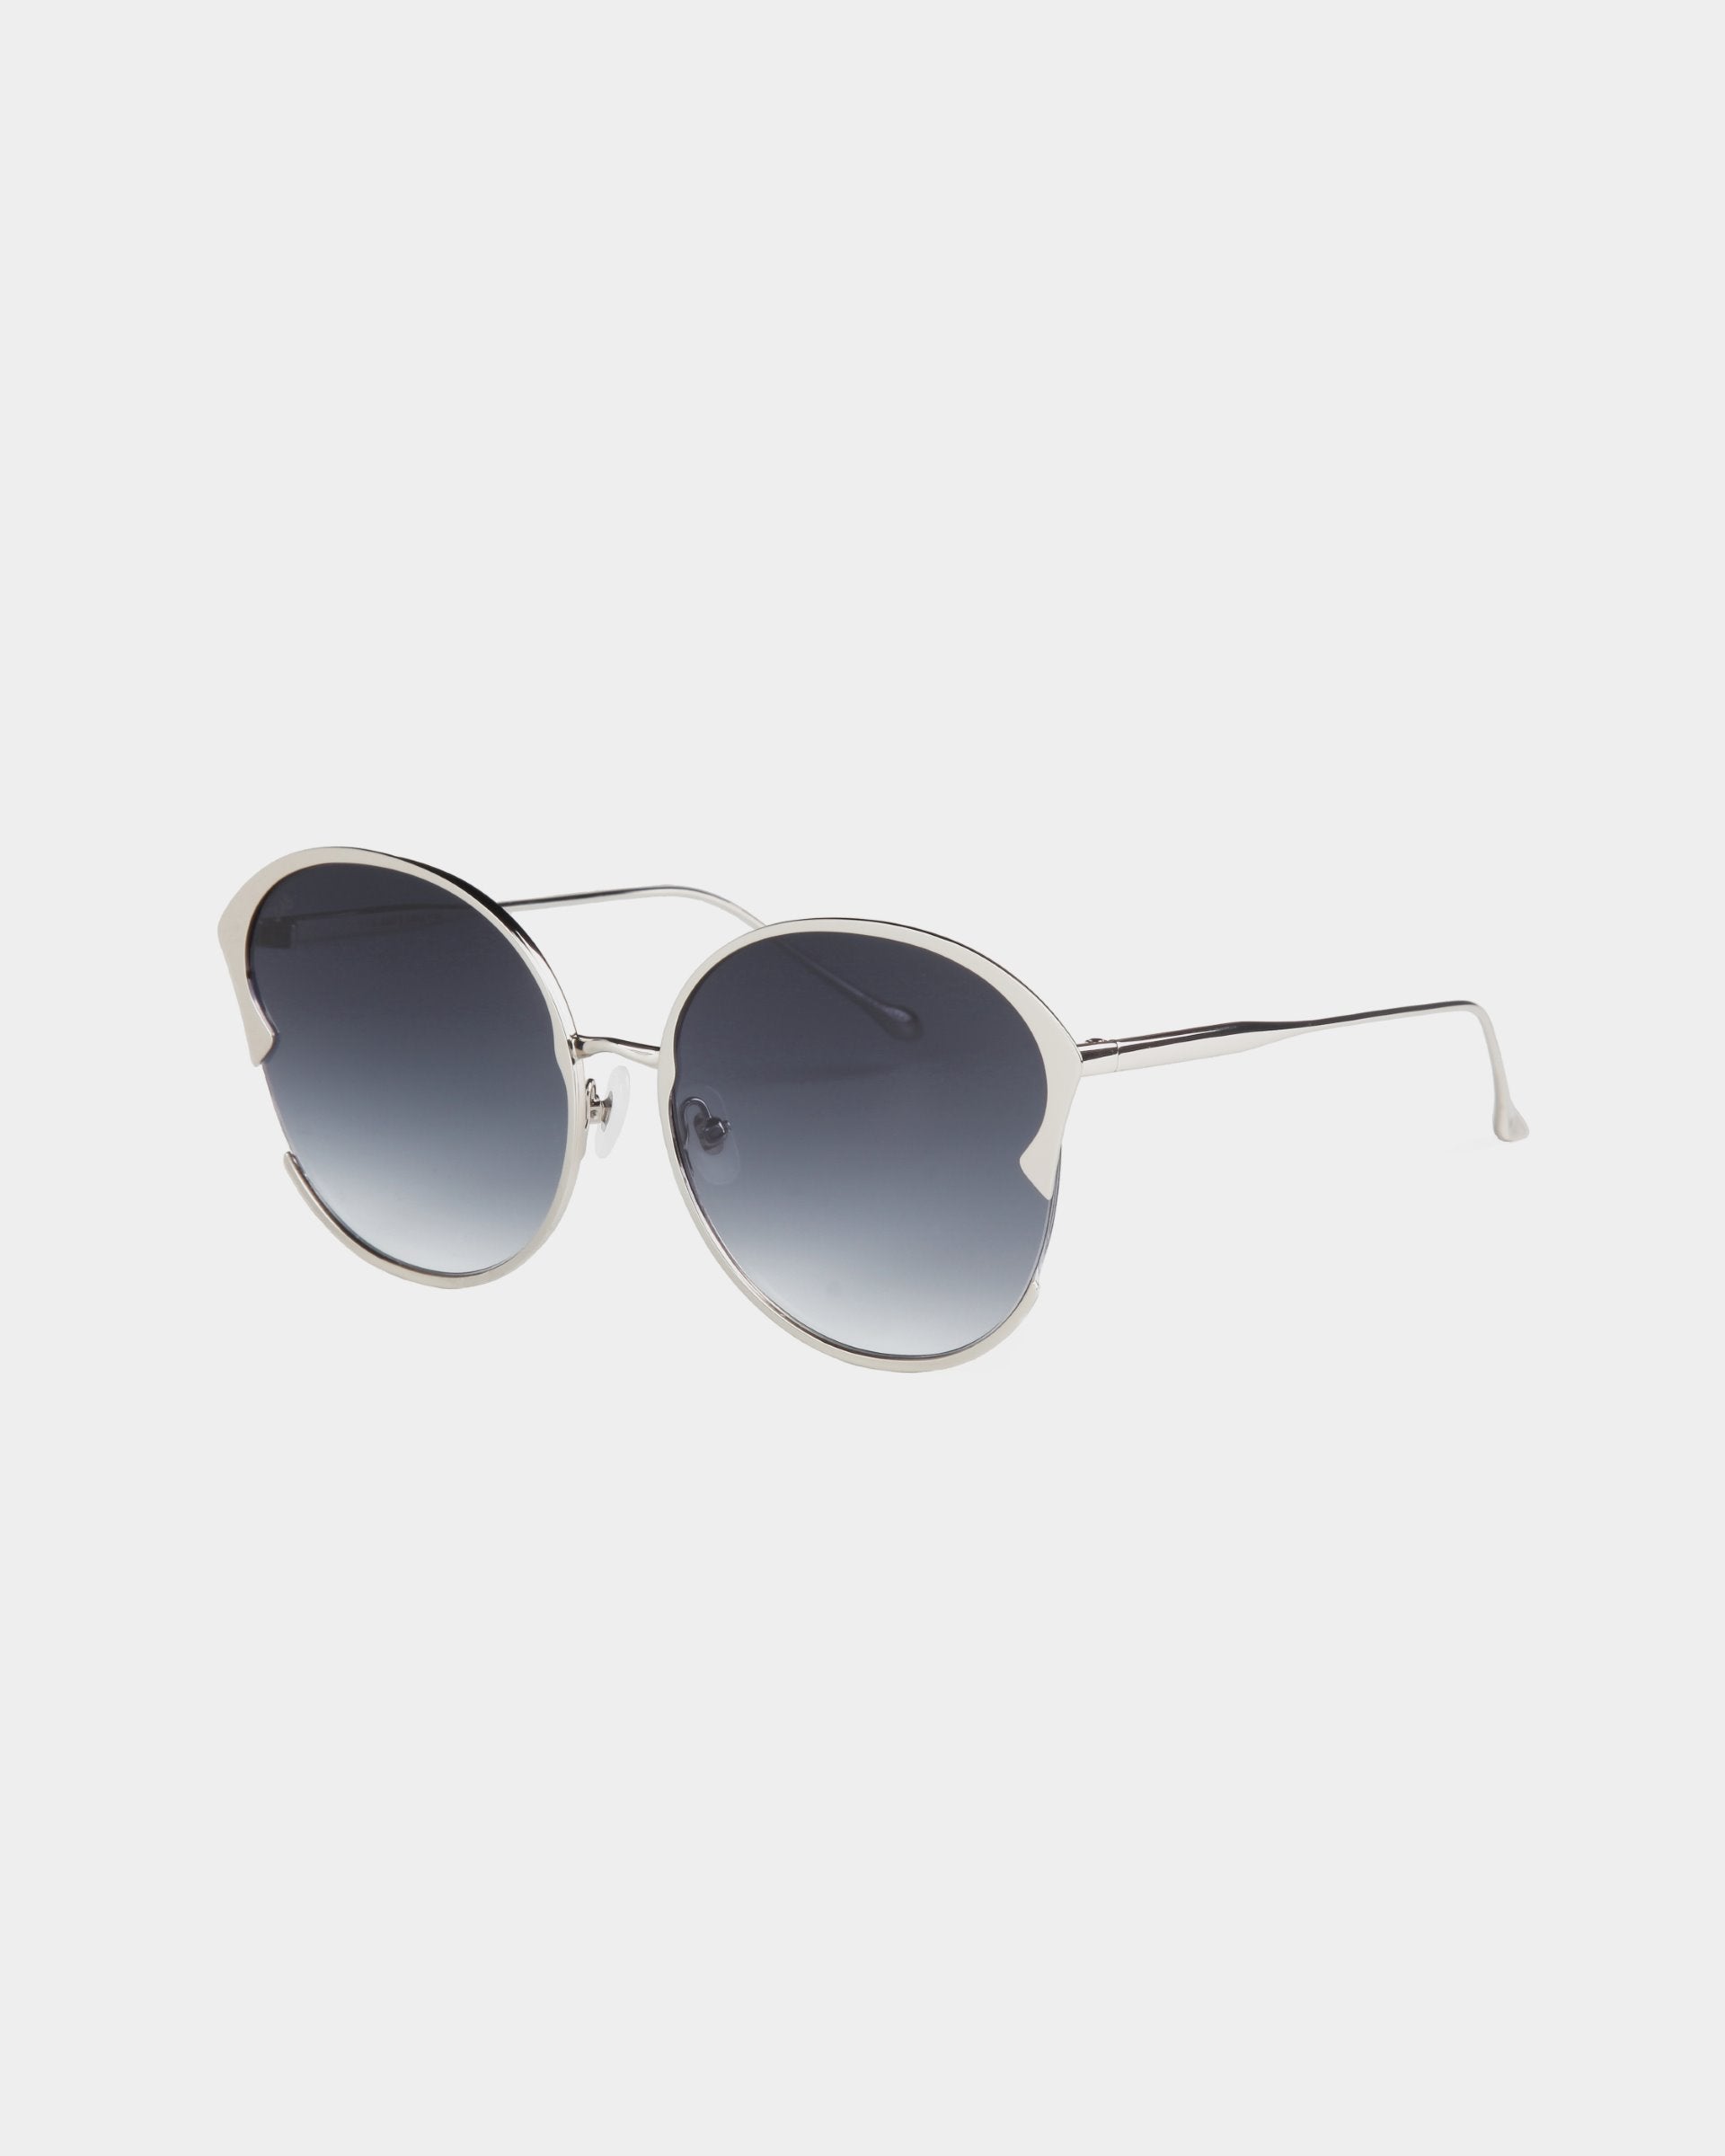 A pair of stylish round Alectrona sunglasses by For Art&#39;s Sake® with silver frames and dark gradient, shatter-resistant lenses. The temples are thin and metallic with a slight curve at the ends. The design includes adjustable jade nose pads and a unique cut-out detail at the top corners of the lenses.